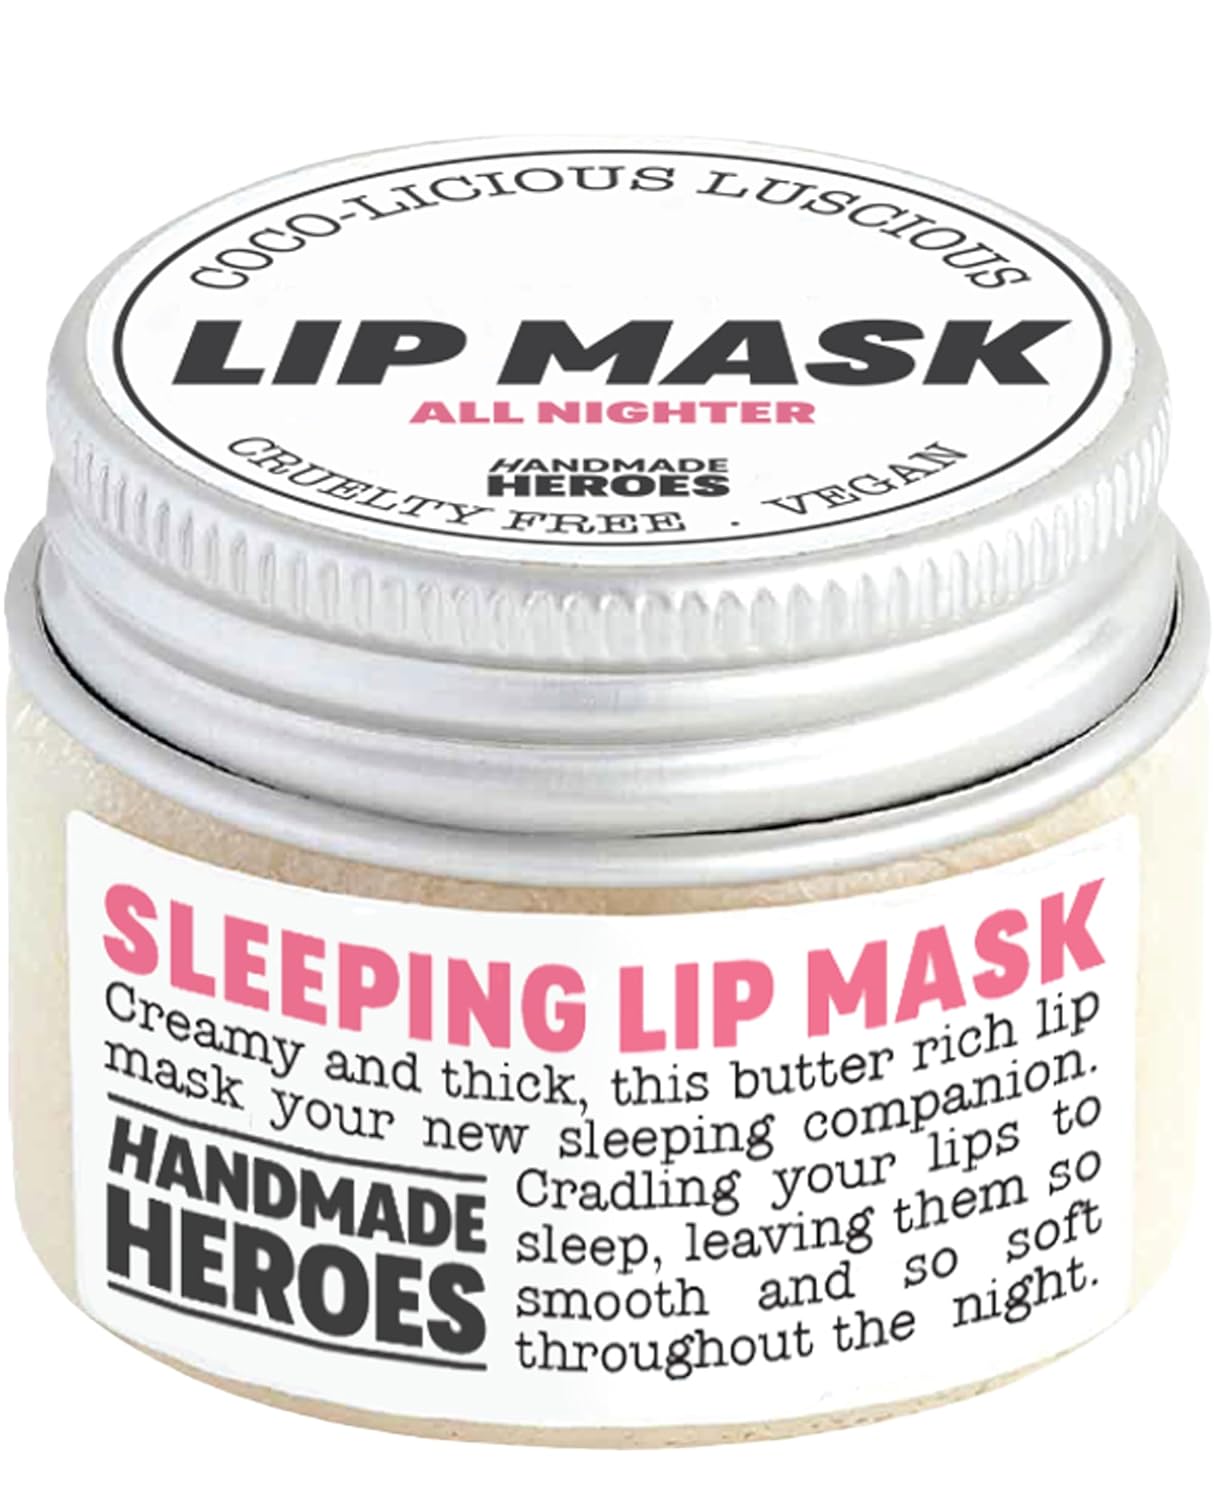 100% Natural Lip Butter Sleeping Lip Mask, Overnight Lip Moisturizer and Conditioner for Dry Lips. Intensive Lip Balm and Lip Therapy Skin Care with Mango butter (Original All Nighter)